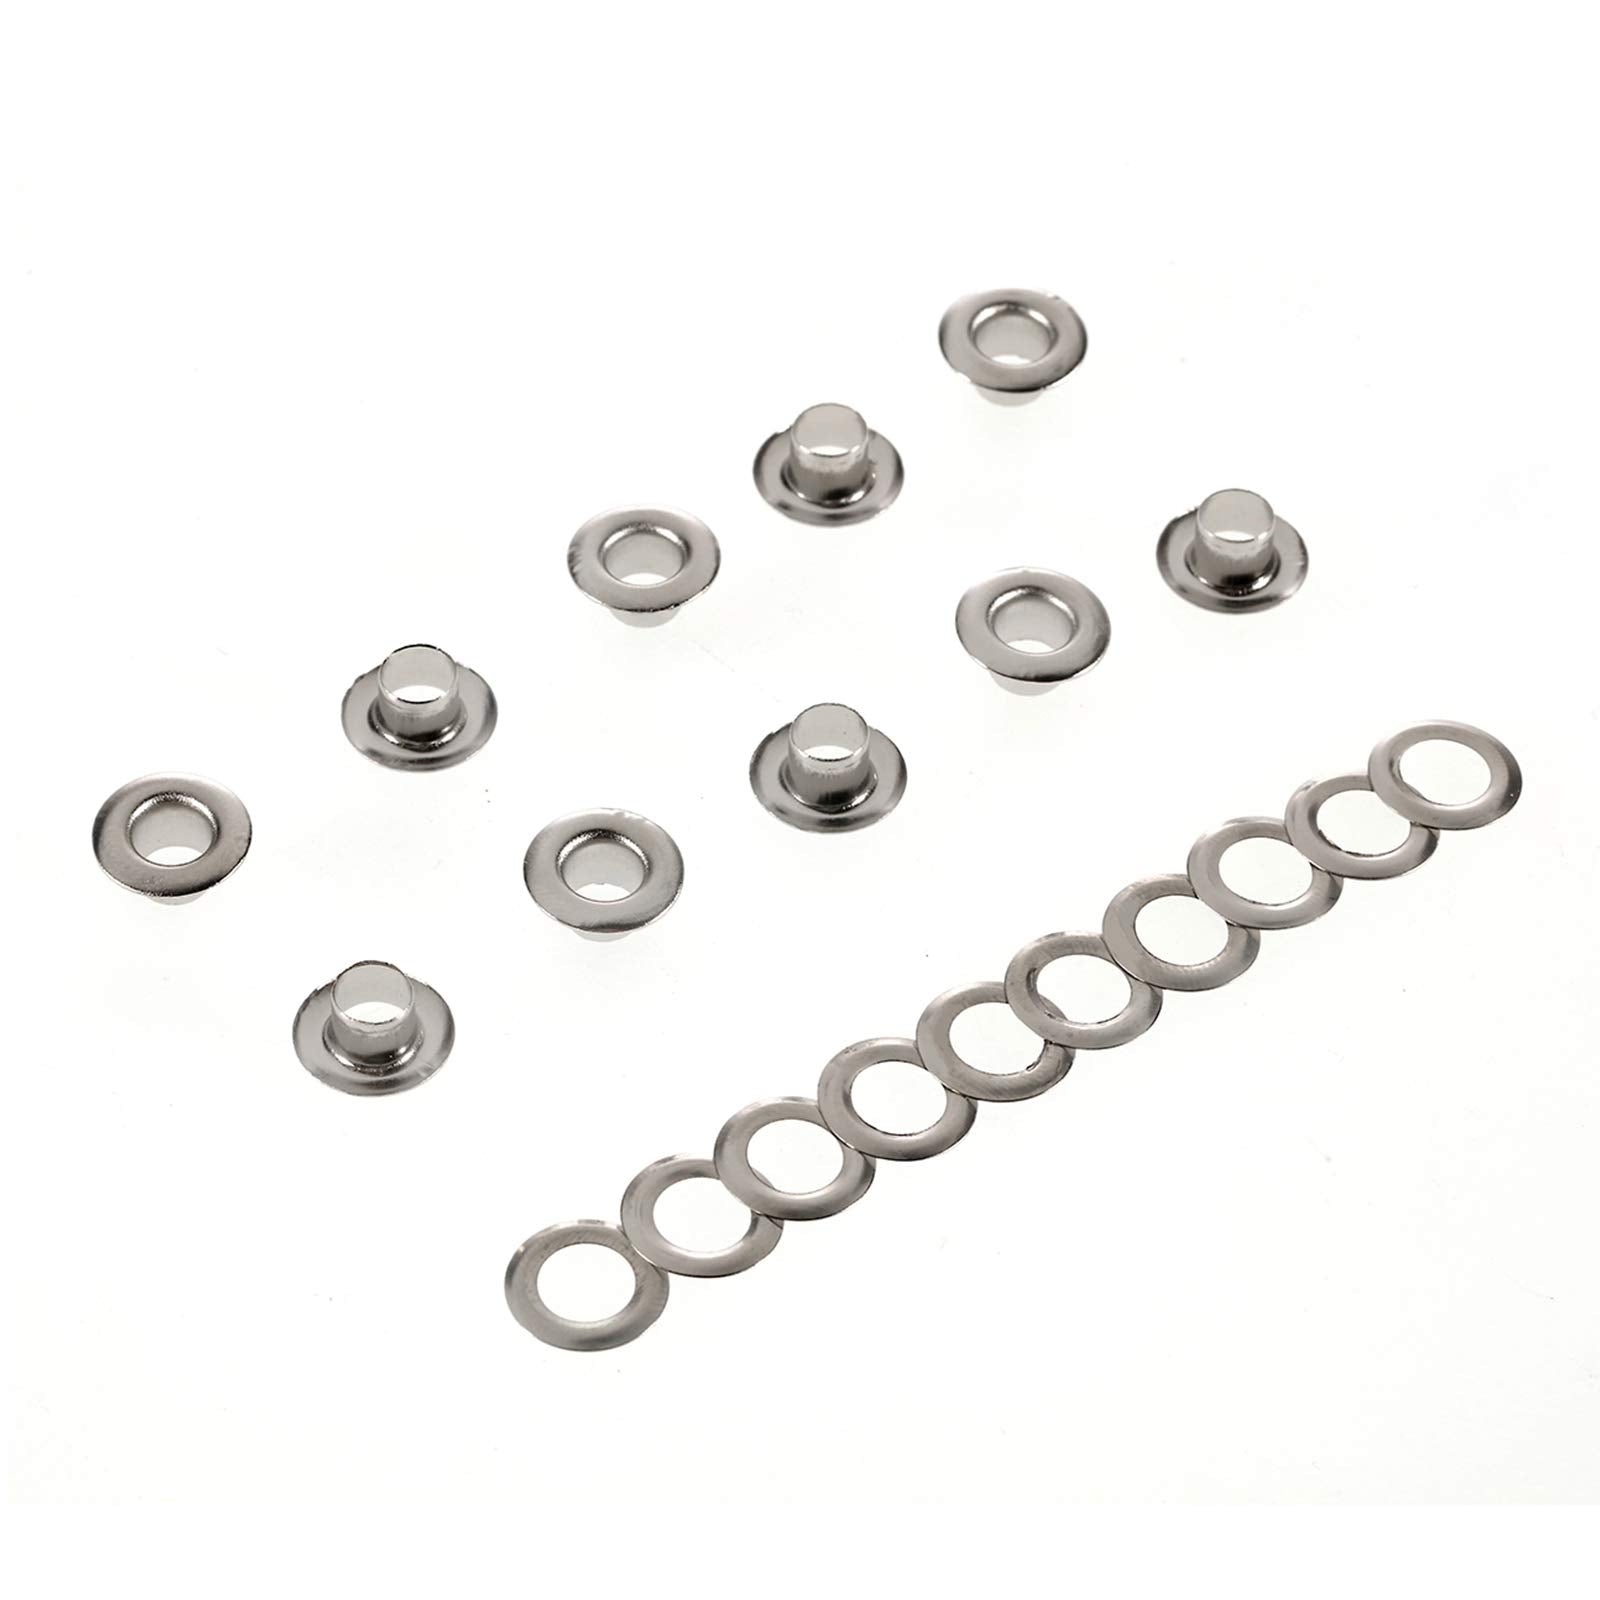 100 Sets 10mm 3/8 Hole Metal Grommets Eyelets Silver Tone for Fabric  Leather Canvas